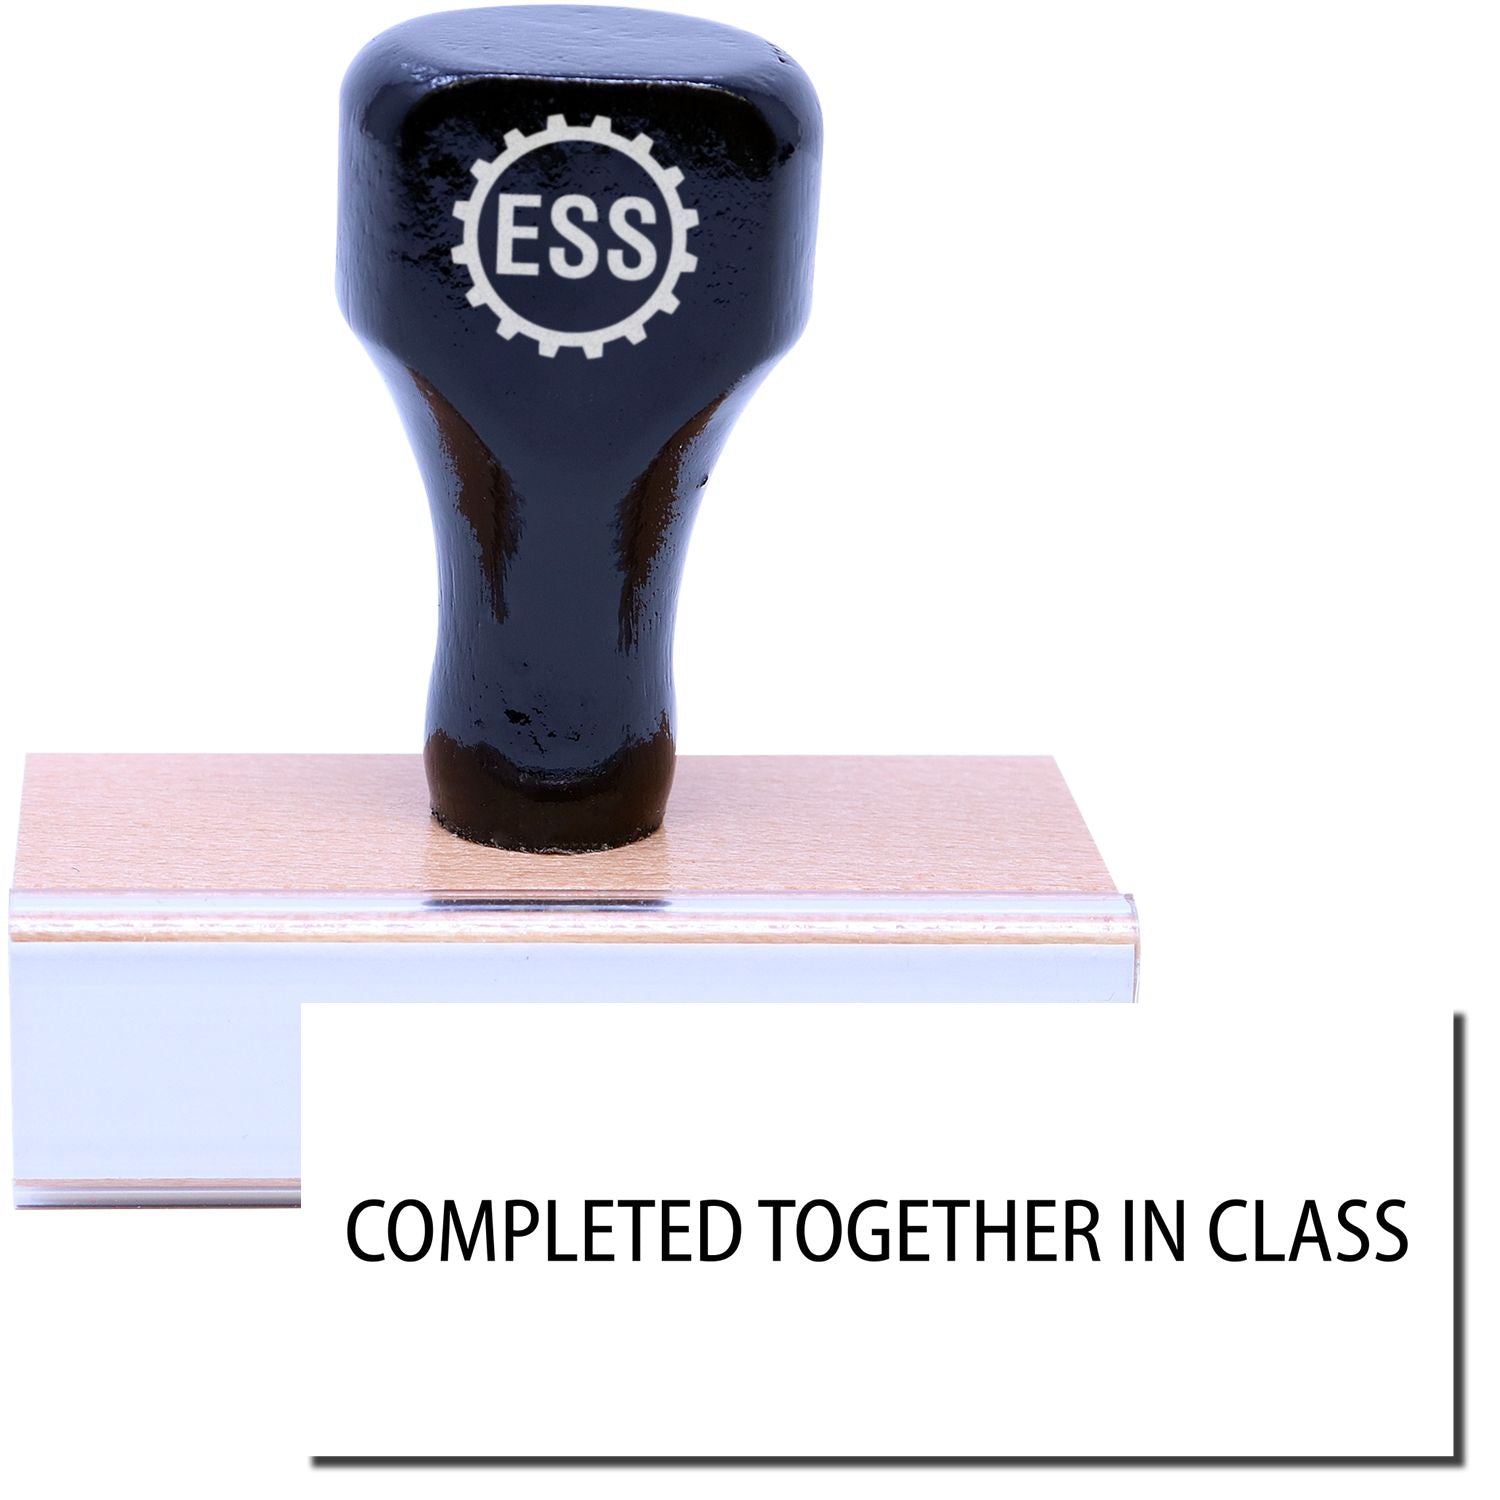 A stock office rubber stamp with a stamped image showing how the text "COMPLETED TOGETHER IN CLASS" is displayed after stamping.